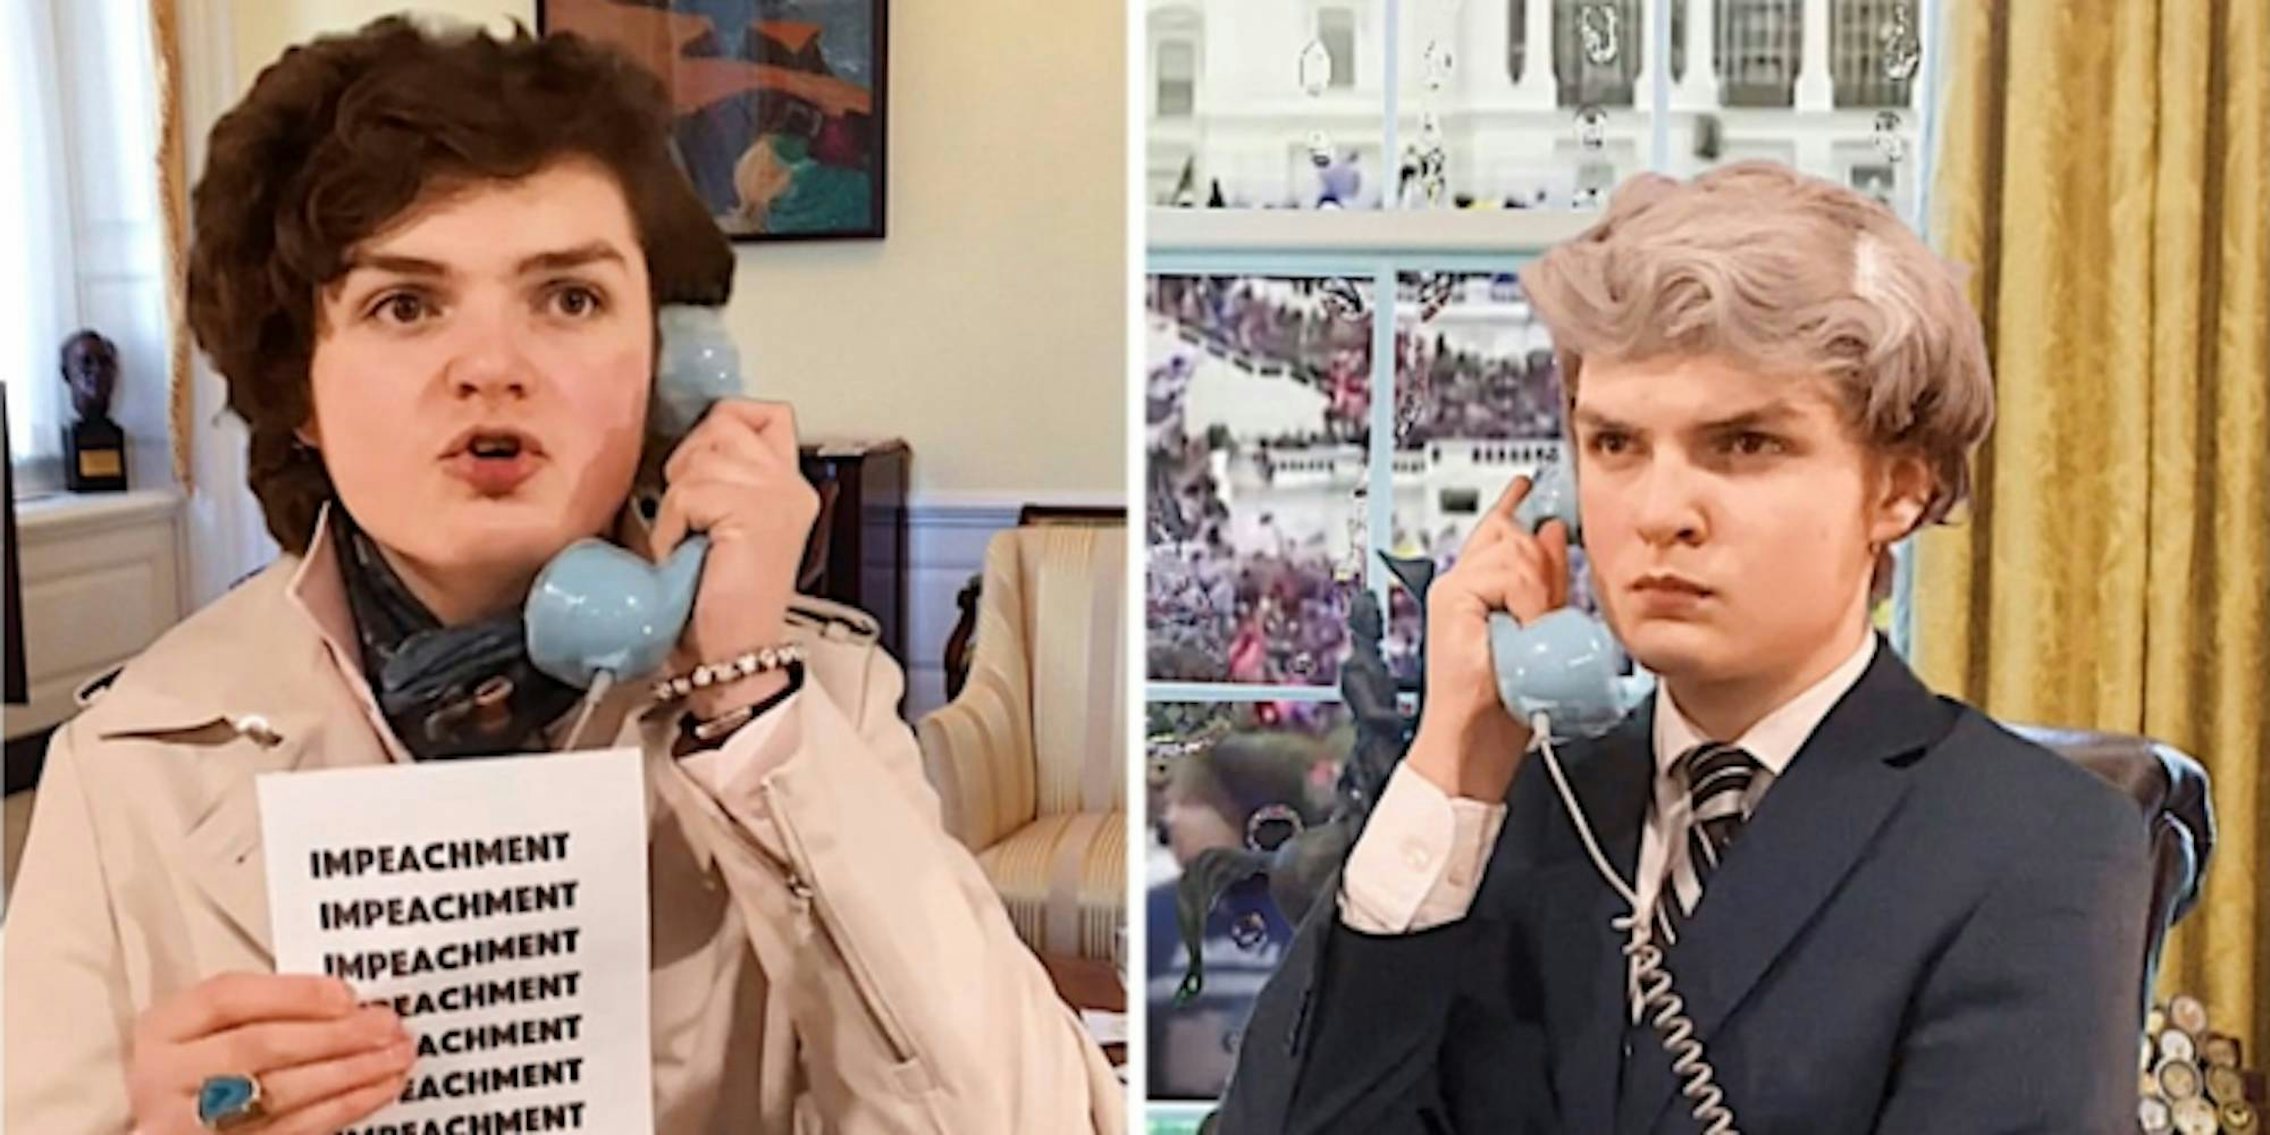 Henry Patterson dressed as Nancy Pelosi, with brown curls and a raincoat, holding a telephone and a piece of paper with 'impeachment' written on it multiple times next to a picture of Henry Patterson as Mike Pence with white hair and wearing a suit, also on the phone